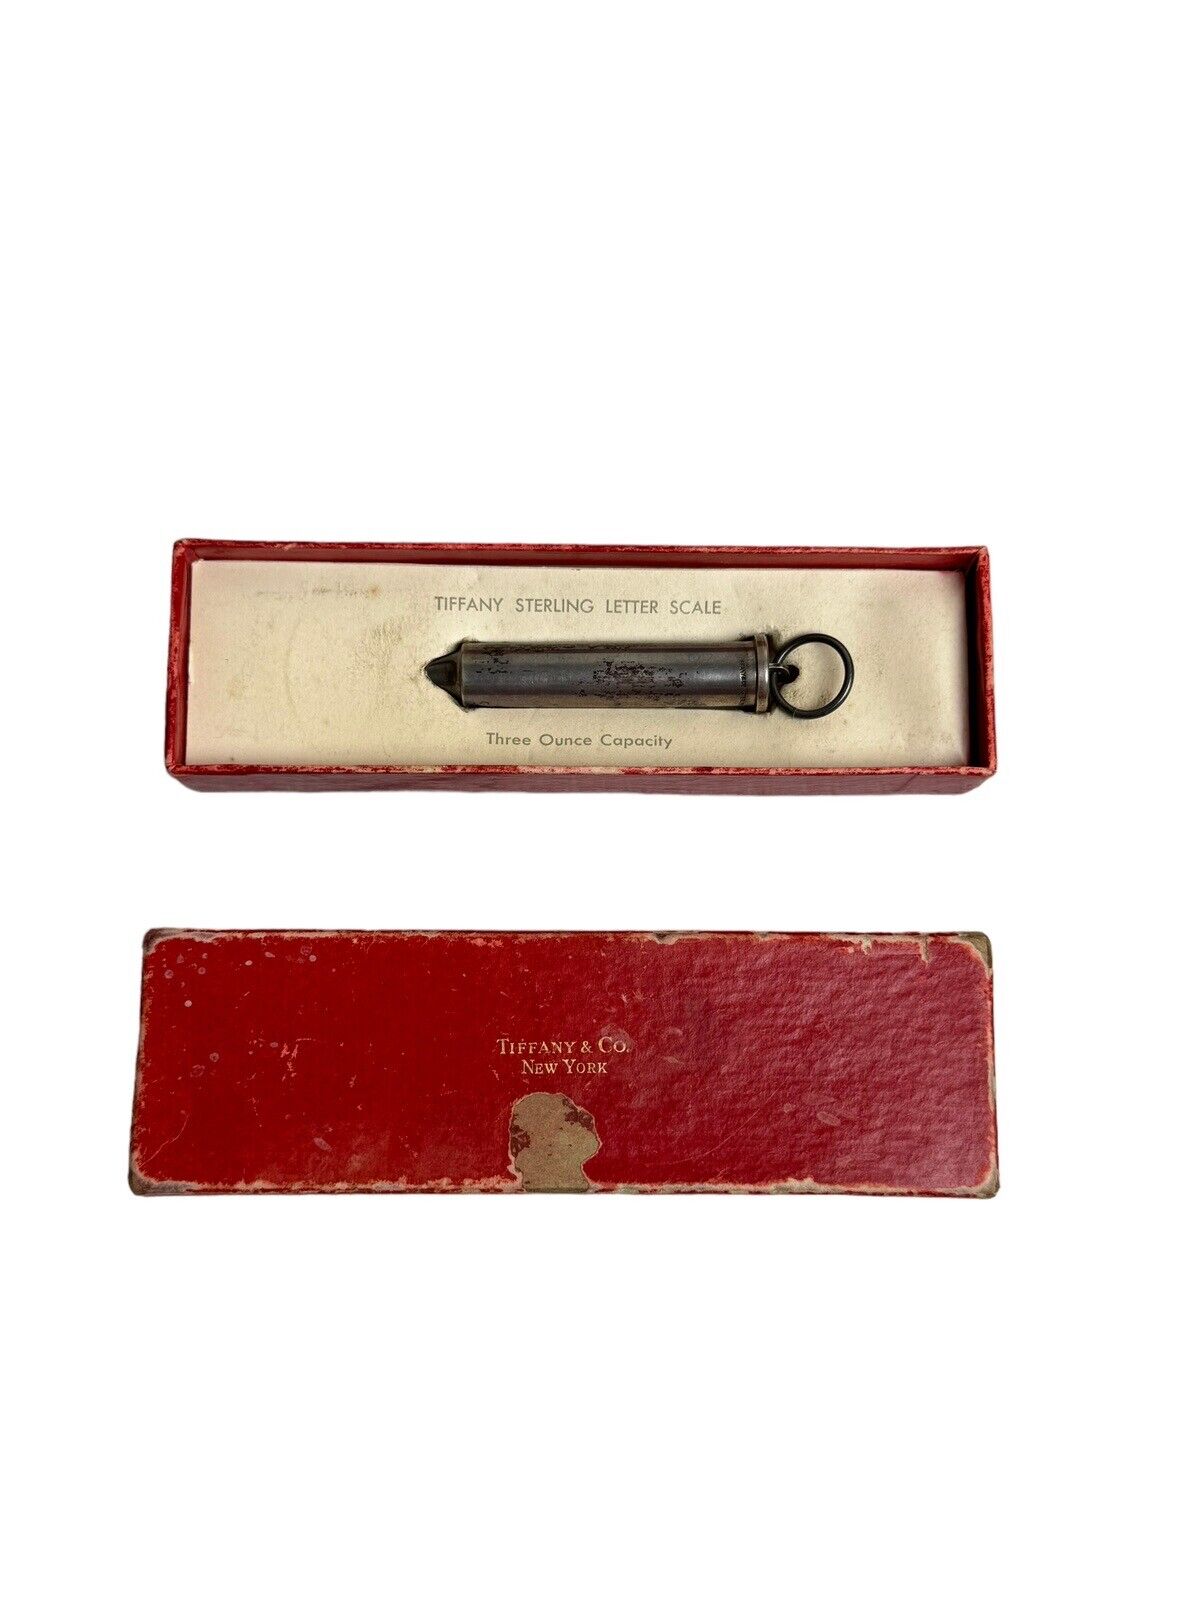 Antique Tiffany & Co., sterling silver spring letter scale, with Box